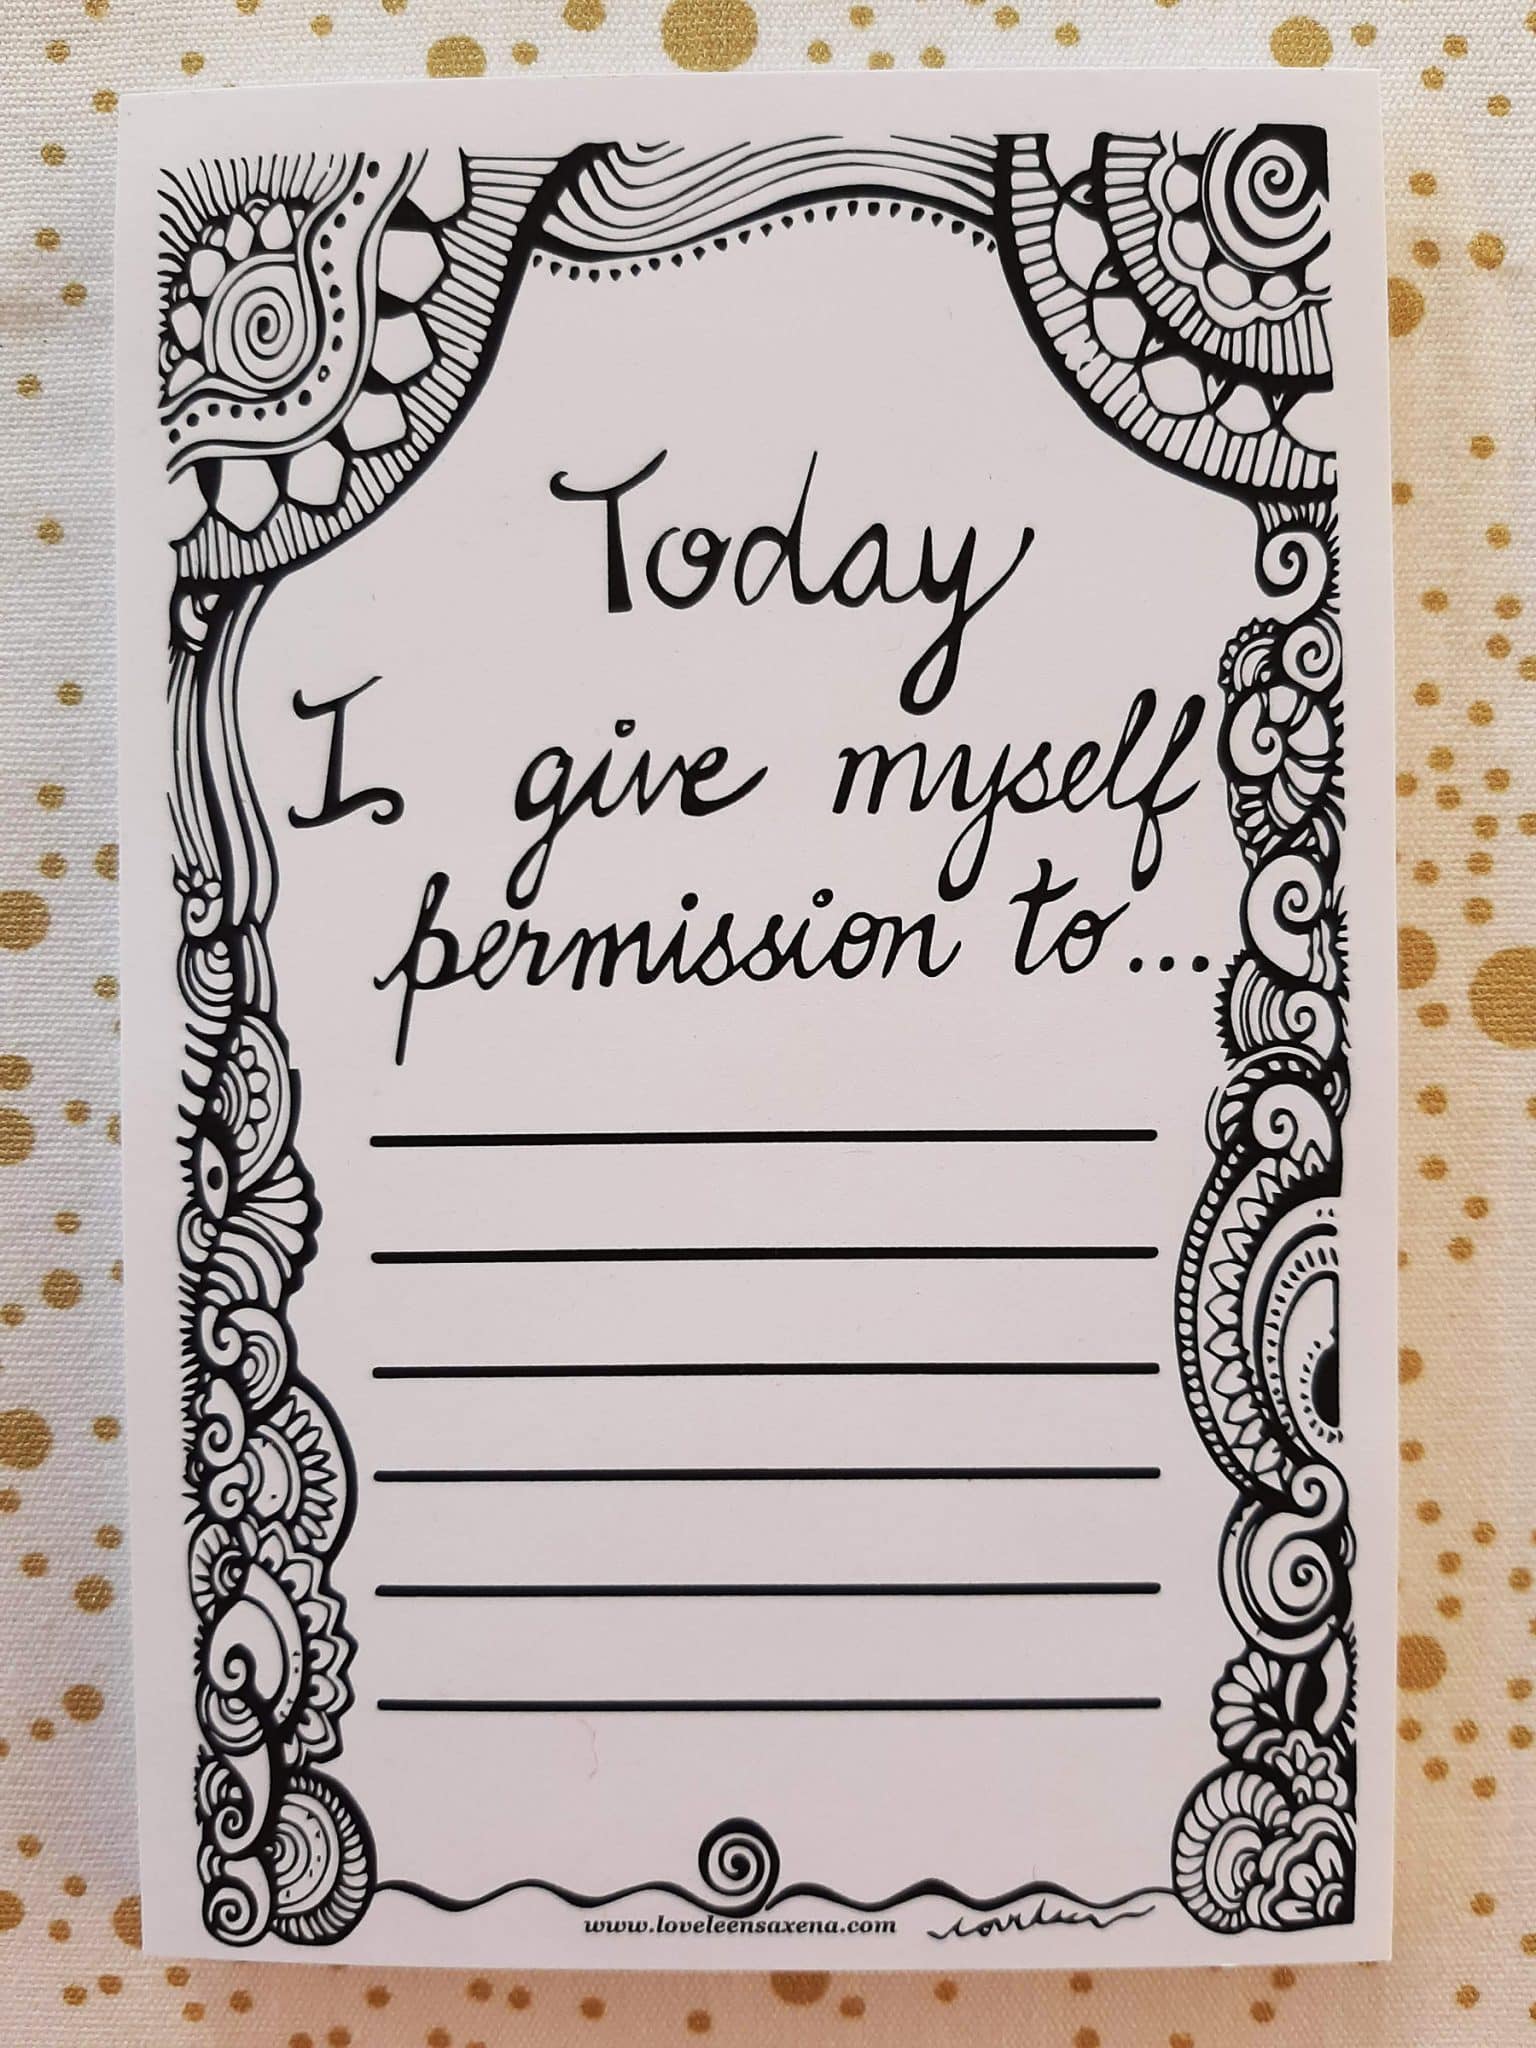 I give myself permission to... notepad